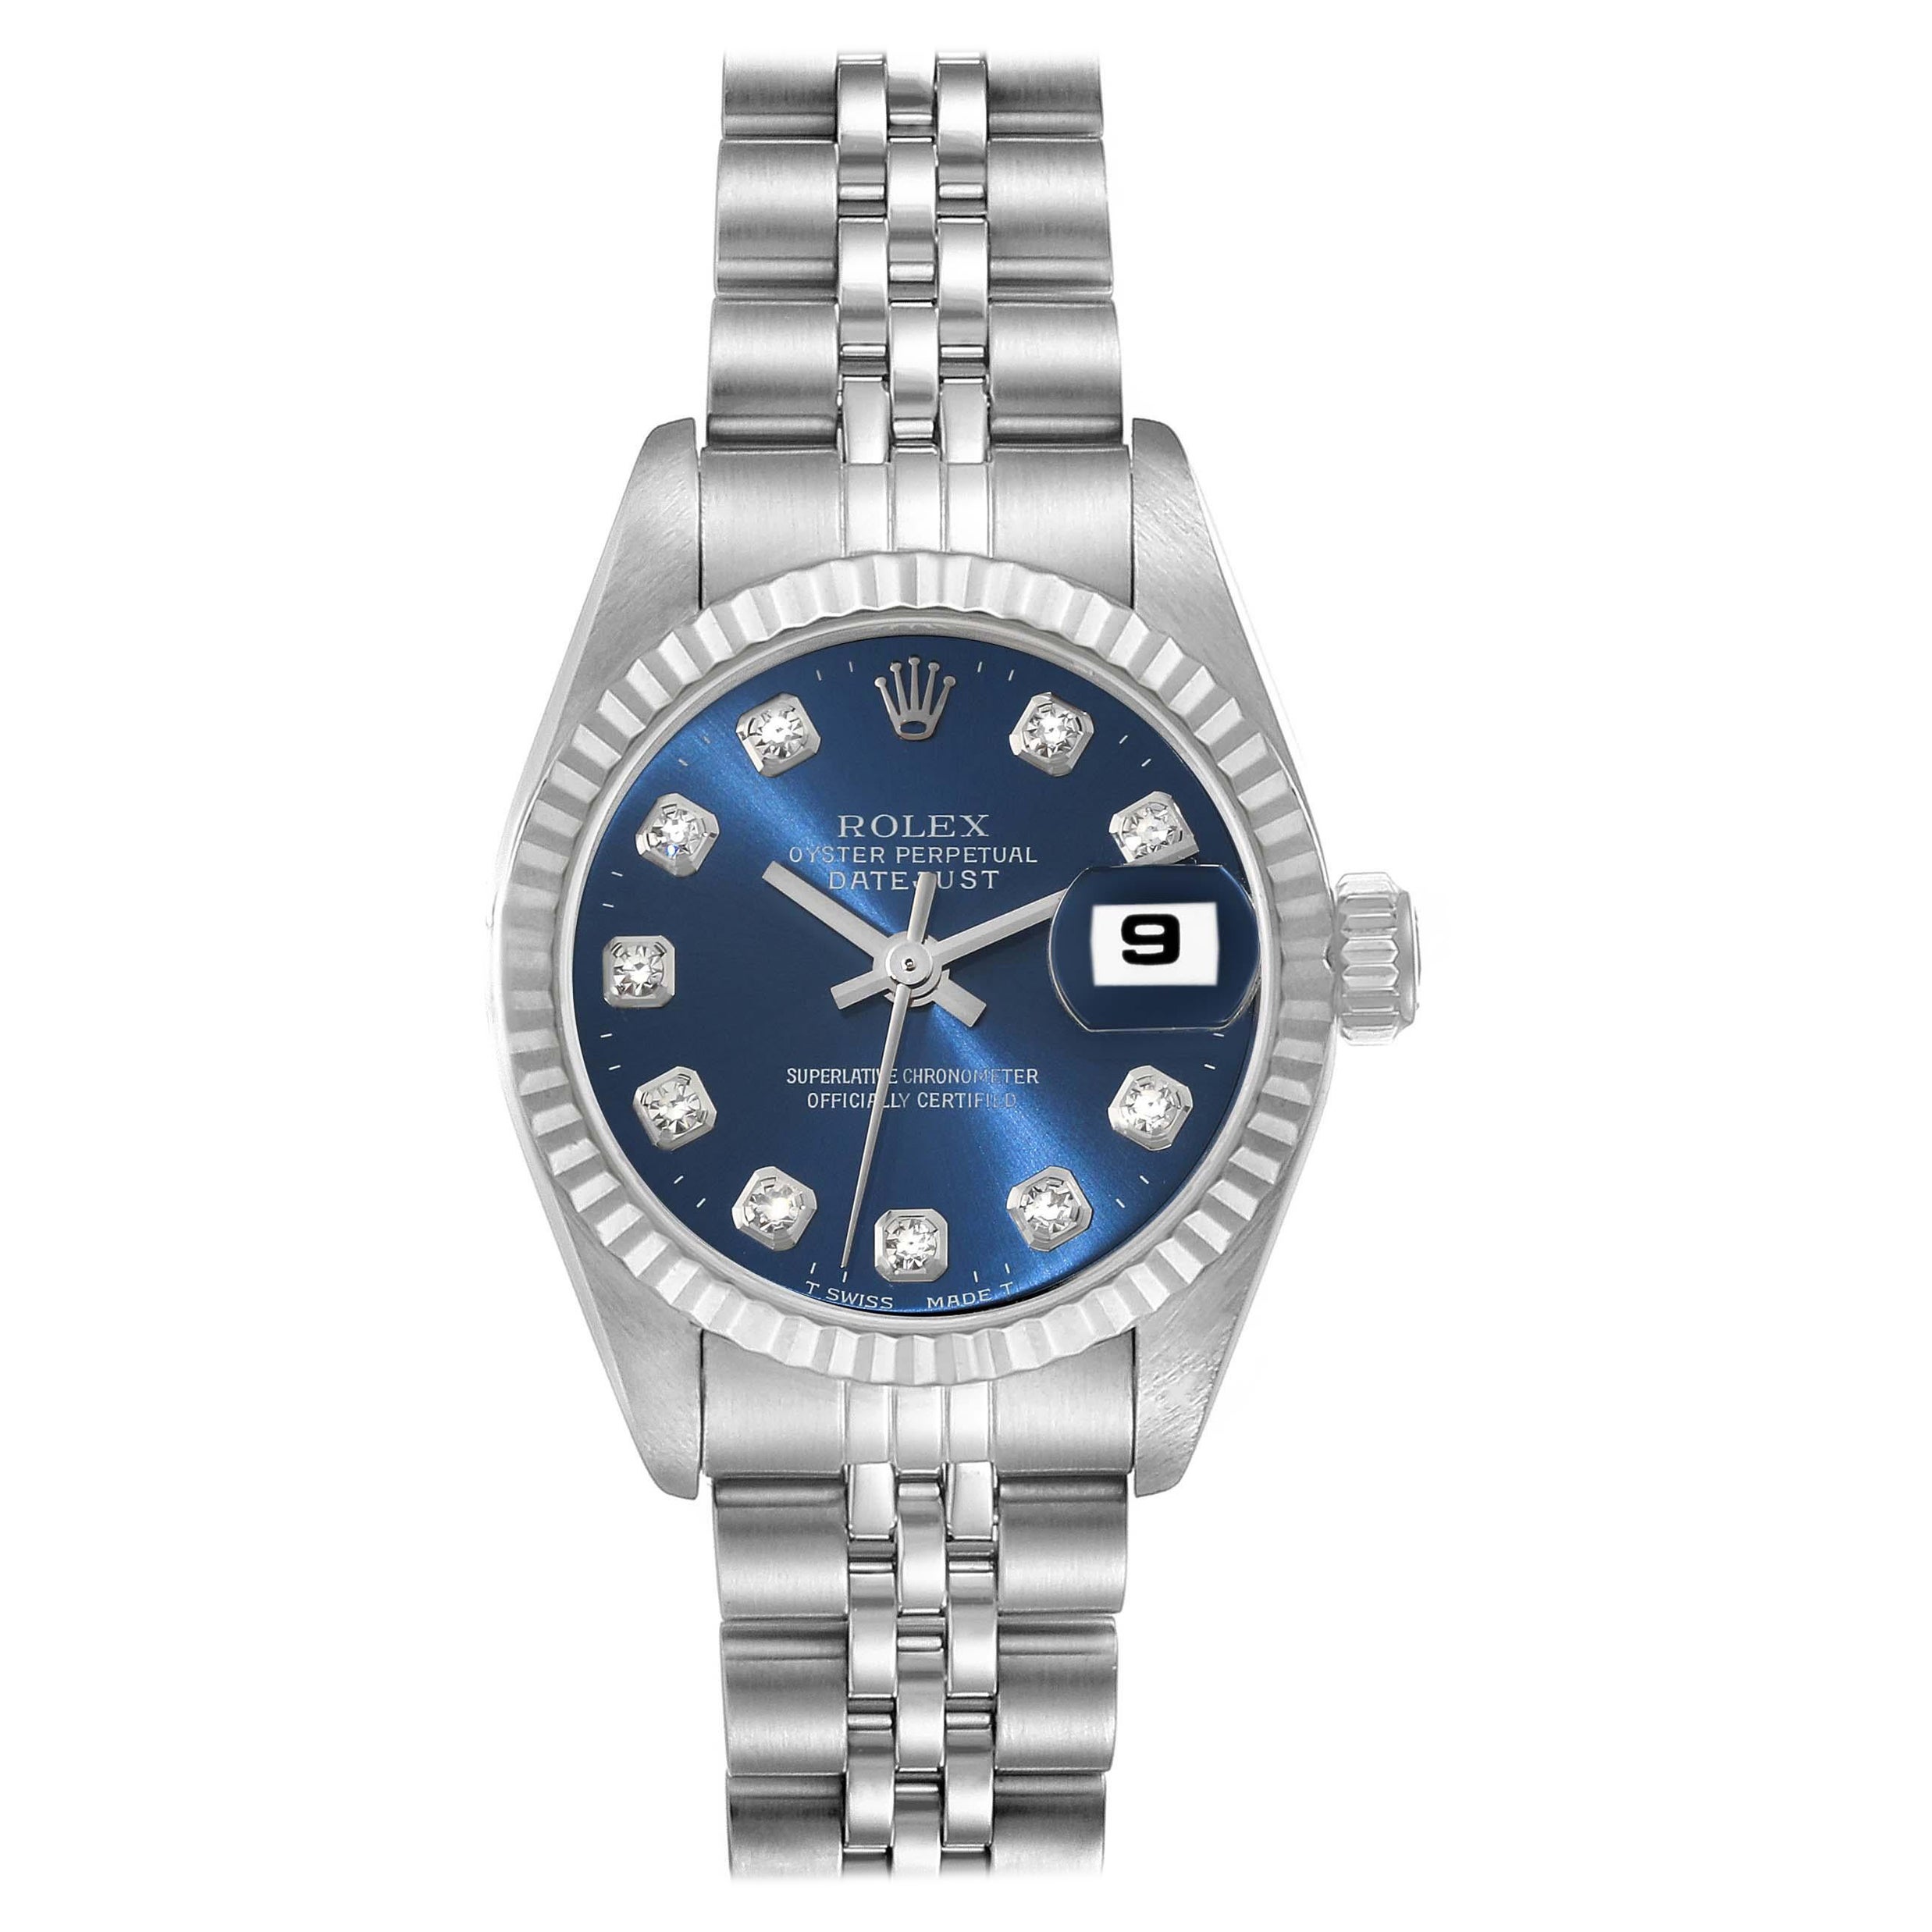 Rolex Datejust Steel White Gold Blue Diamond Dial Ladies Watch 69174 Box Papers